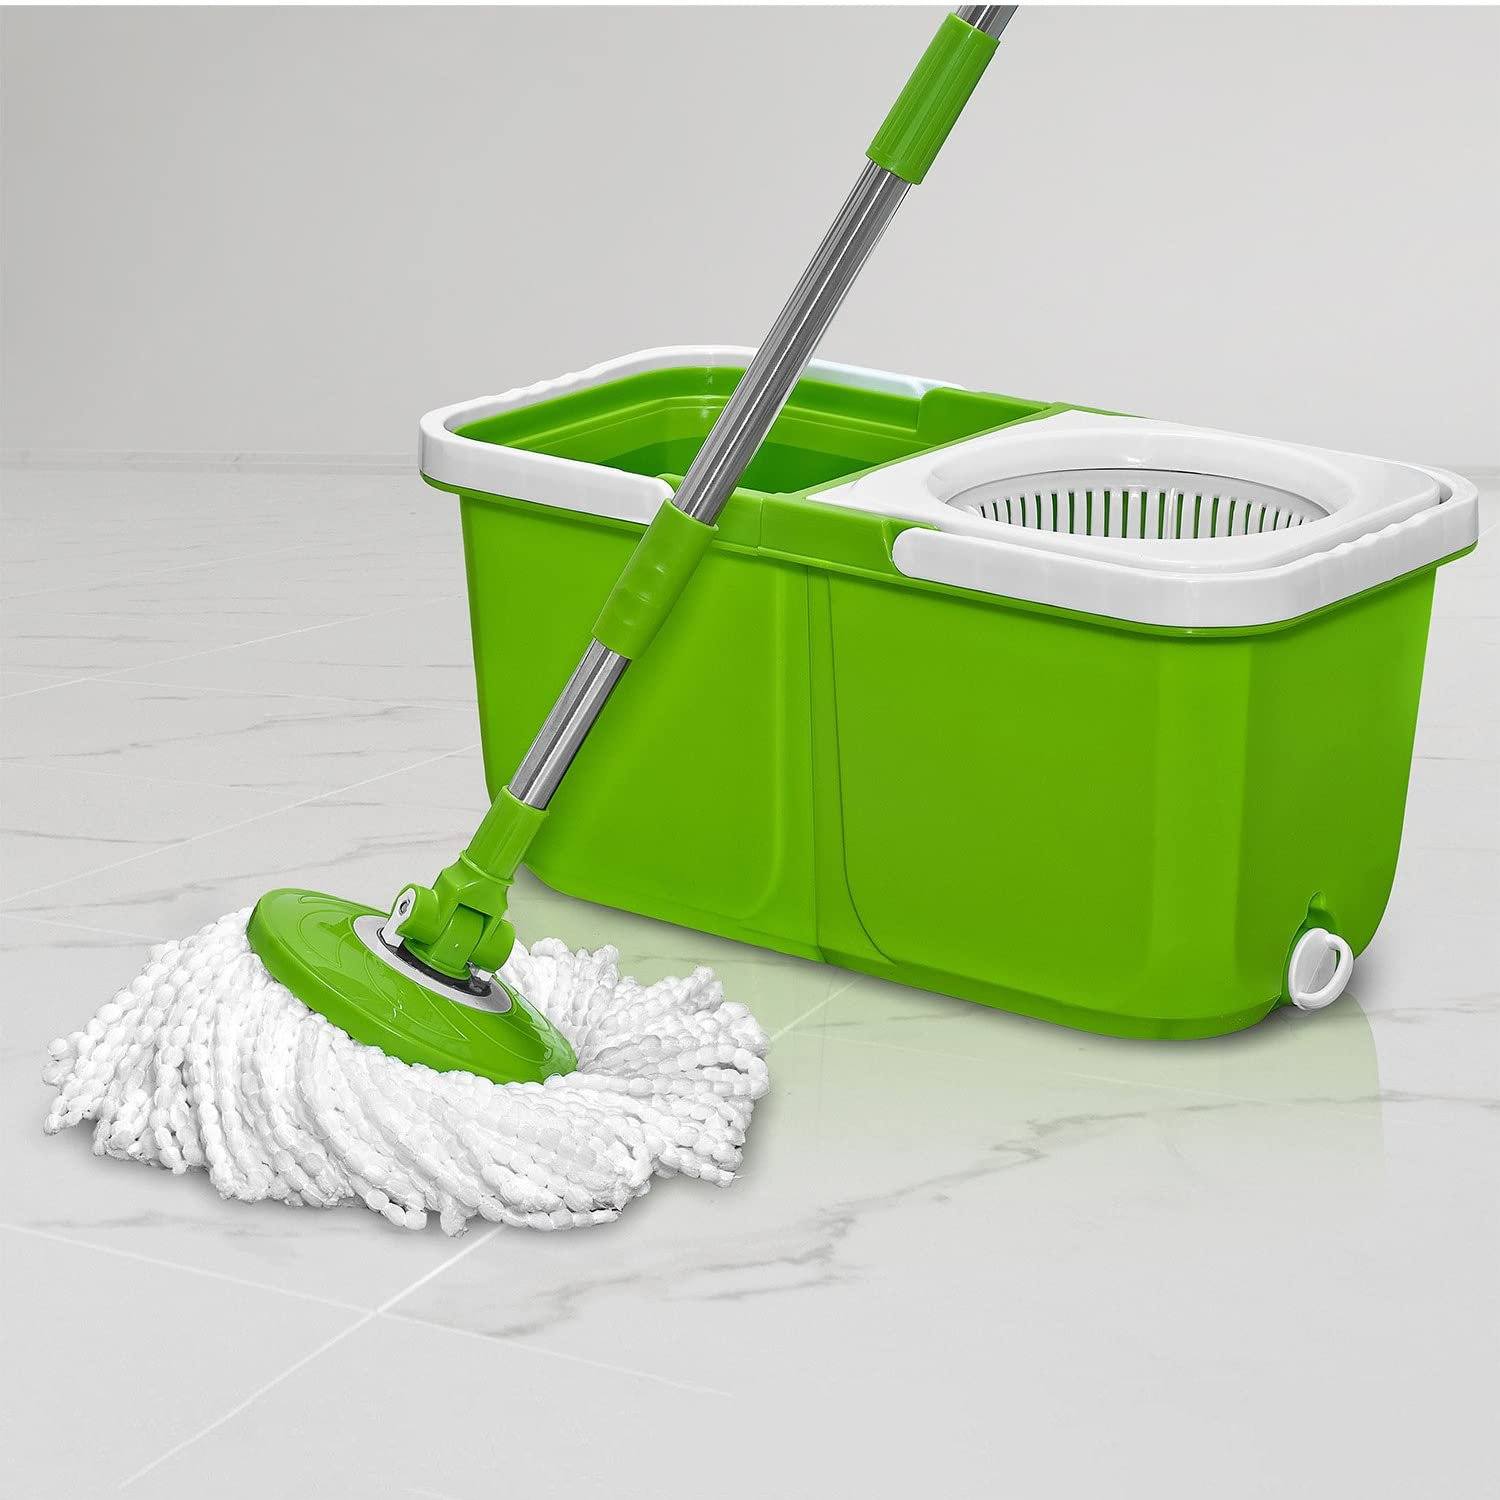 Spinning mop. Швабра Spin Mop. Швабра зеленая. Оранжевая швабра. Spin Mop efficient Dynamics.